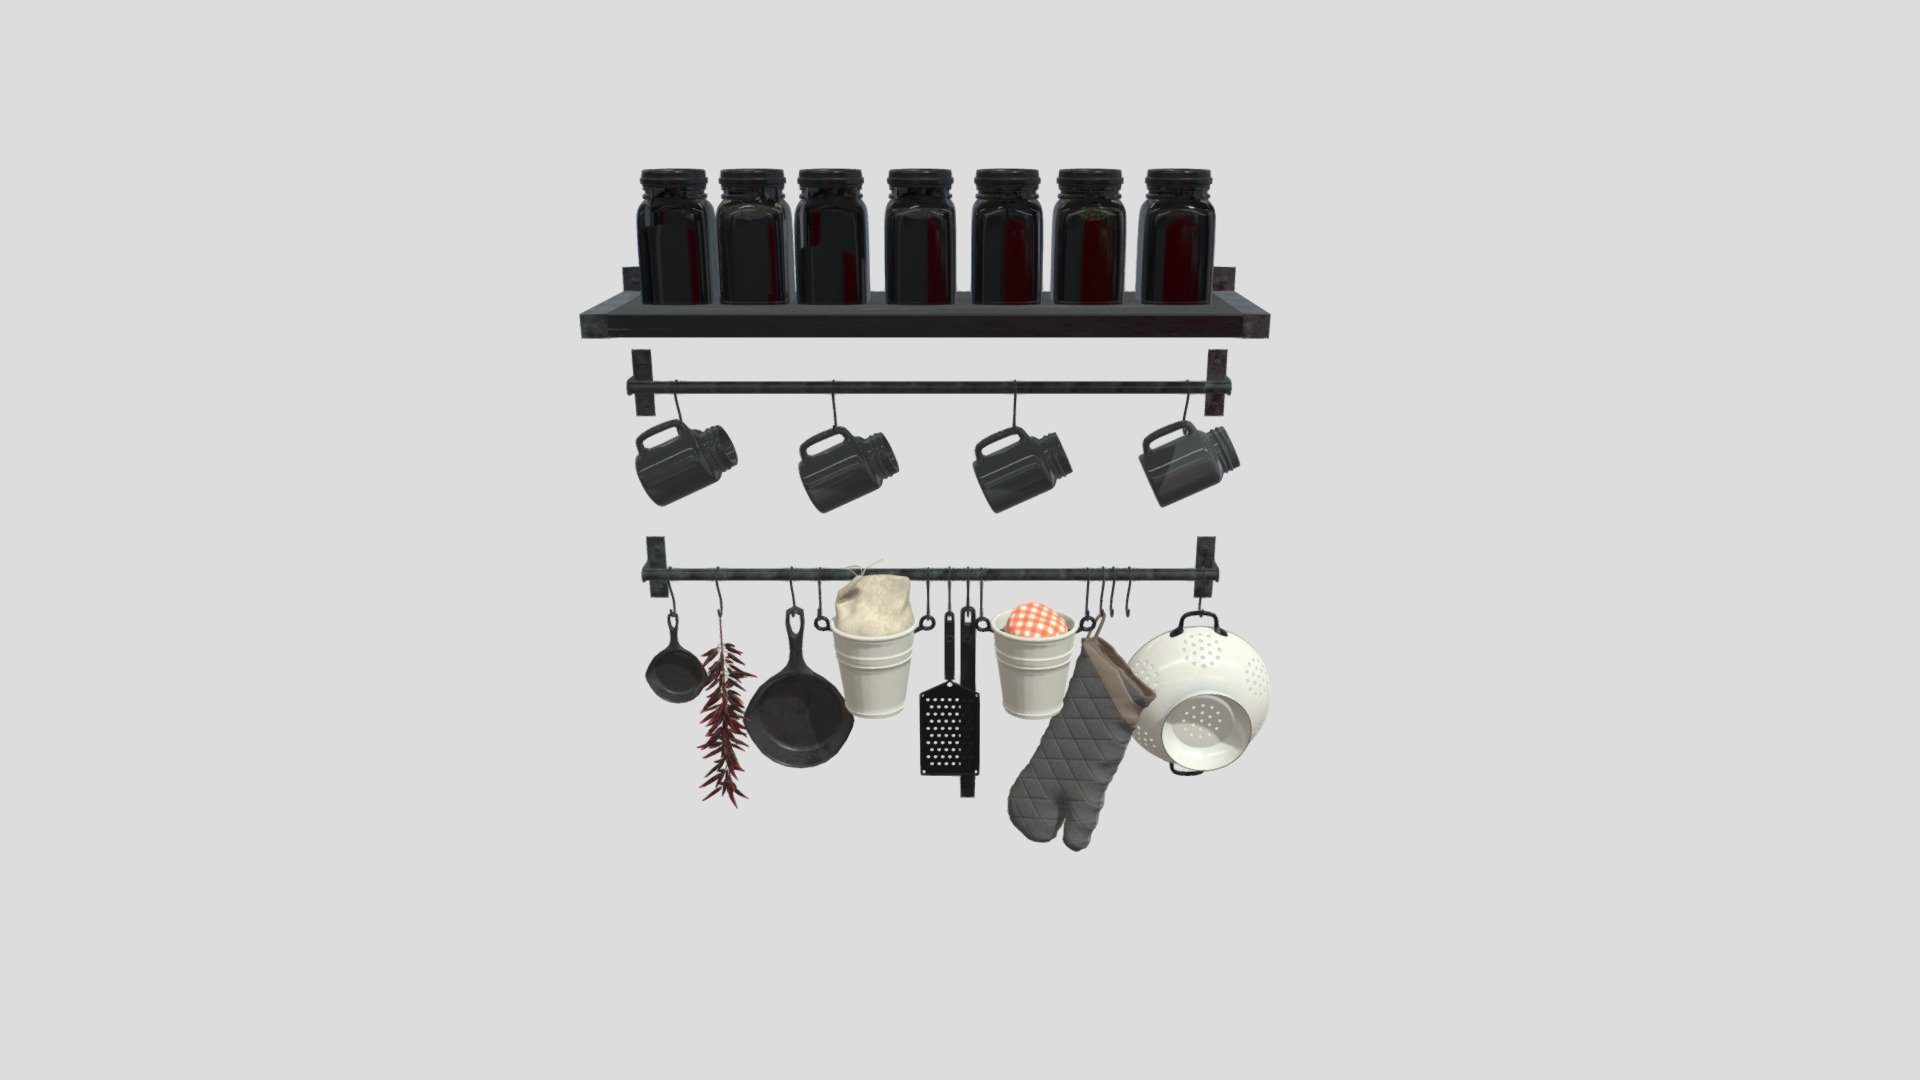 Highly detailed 3d model of kitchen props with all textures, shaders and materials. This 3d model is ready to use, just put it into your scene 3d model